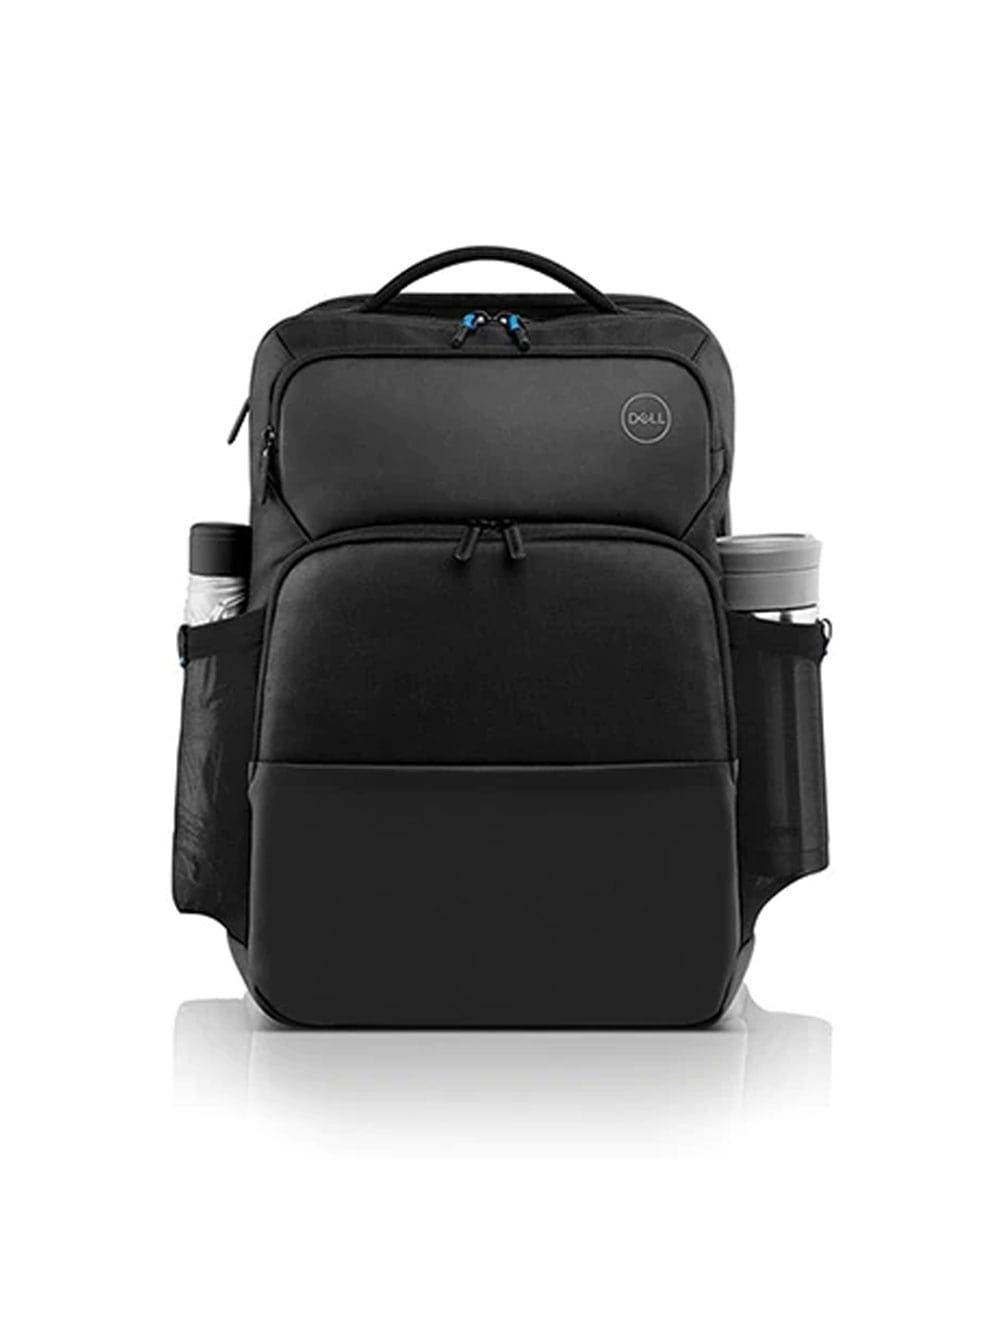 Dell Laptop Backpack -15.6